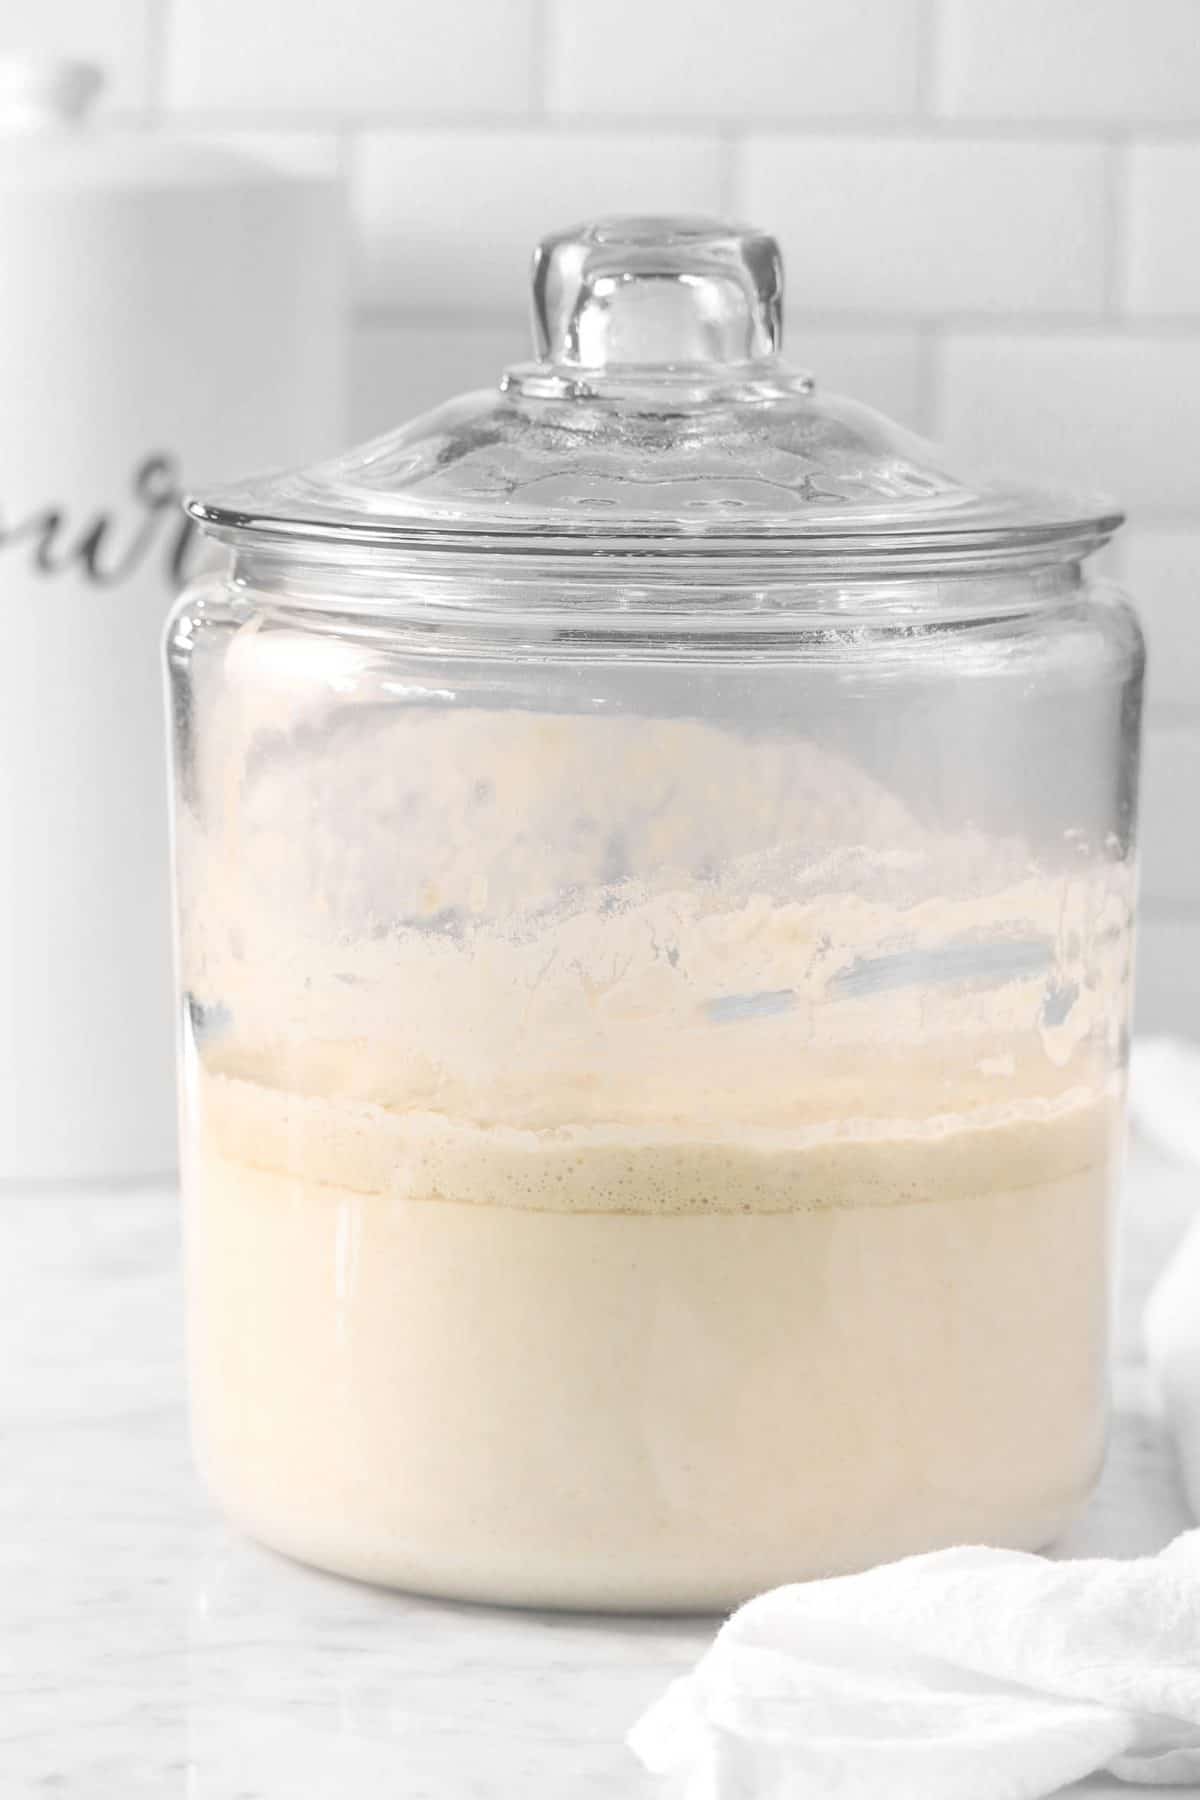 sourdough starter in a glass jar with a white napkin and a container of flour